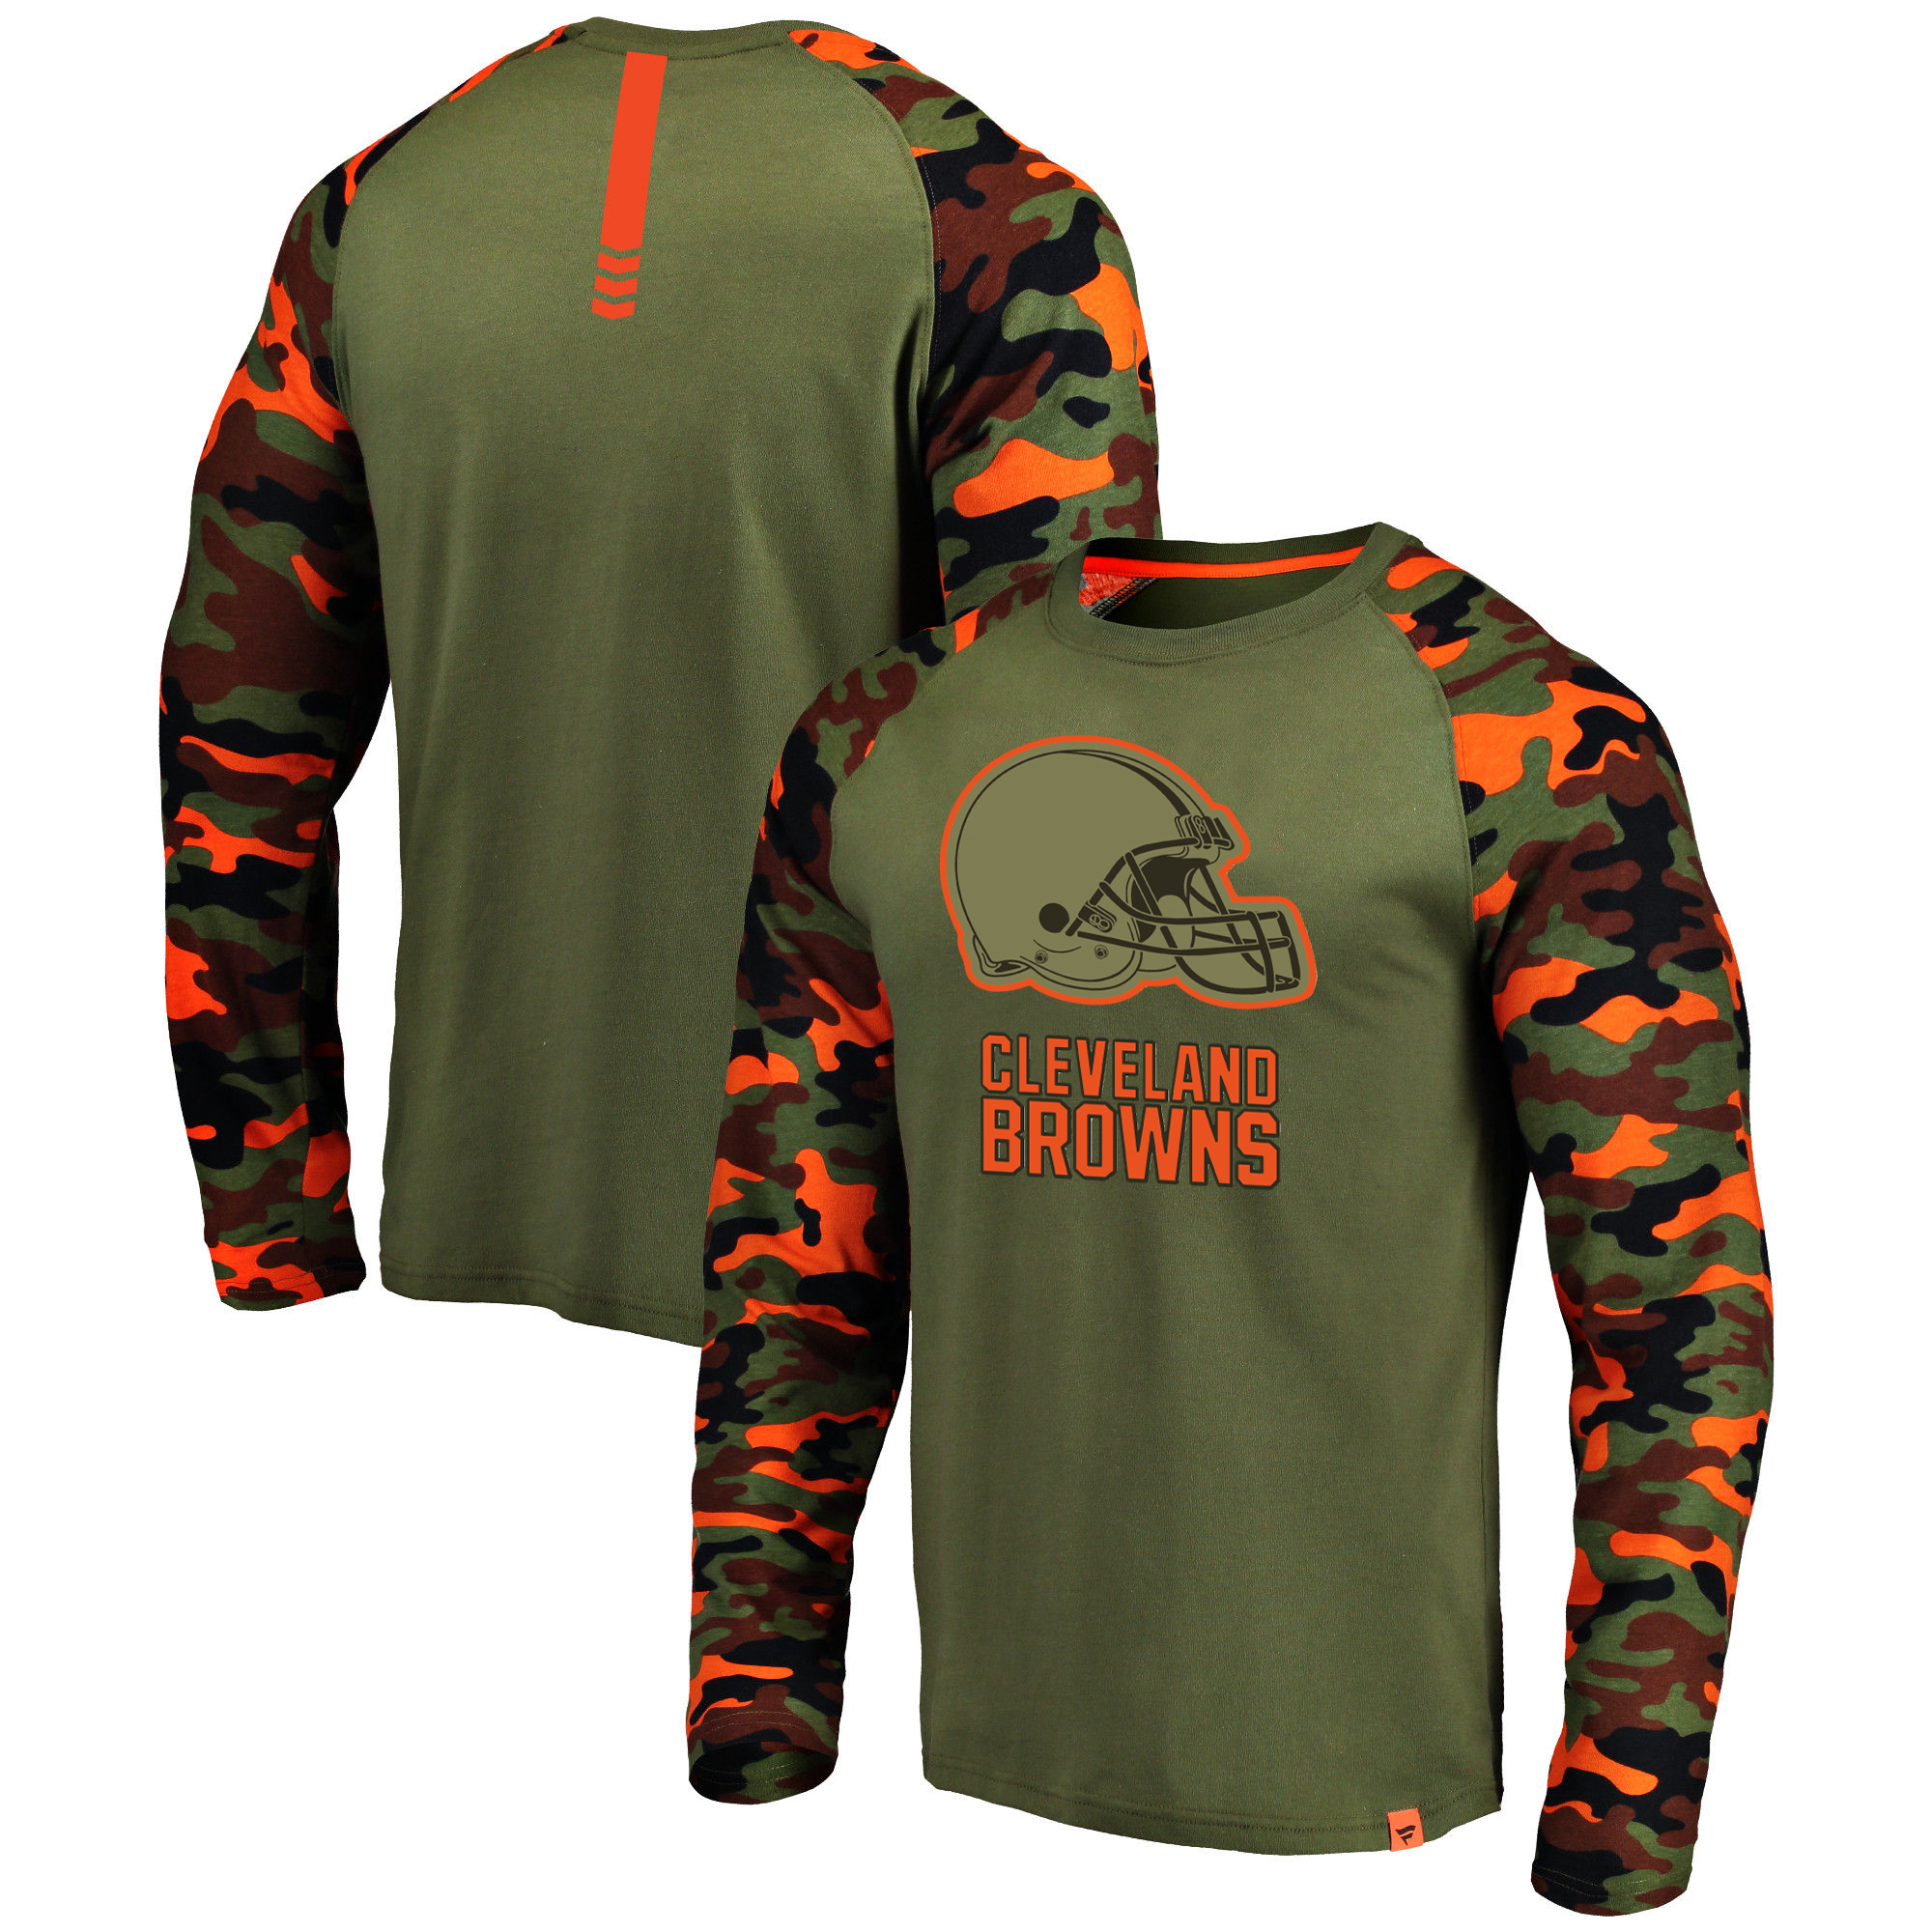 Cleveland Browns Heathered Gray Camo NFL Pro Line by Fanatics Branded Long Sleeve T-Shirt